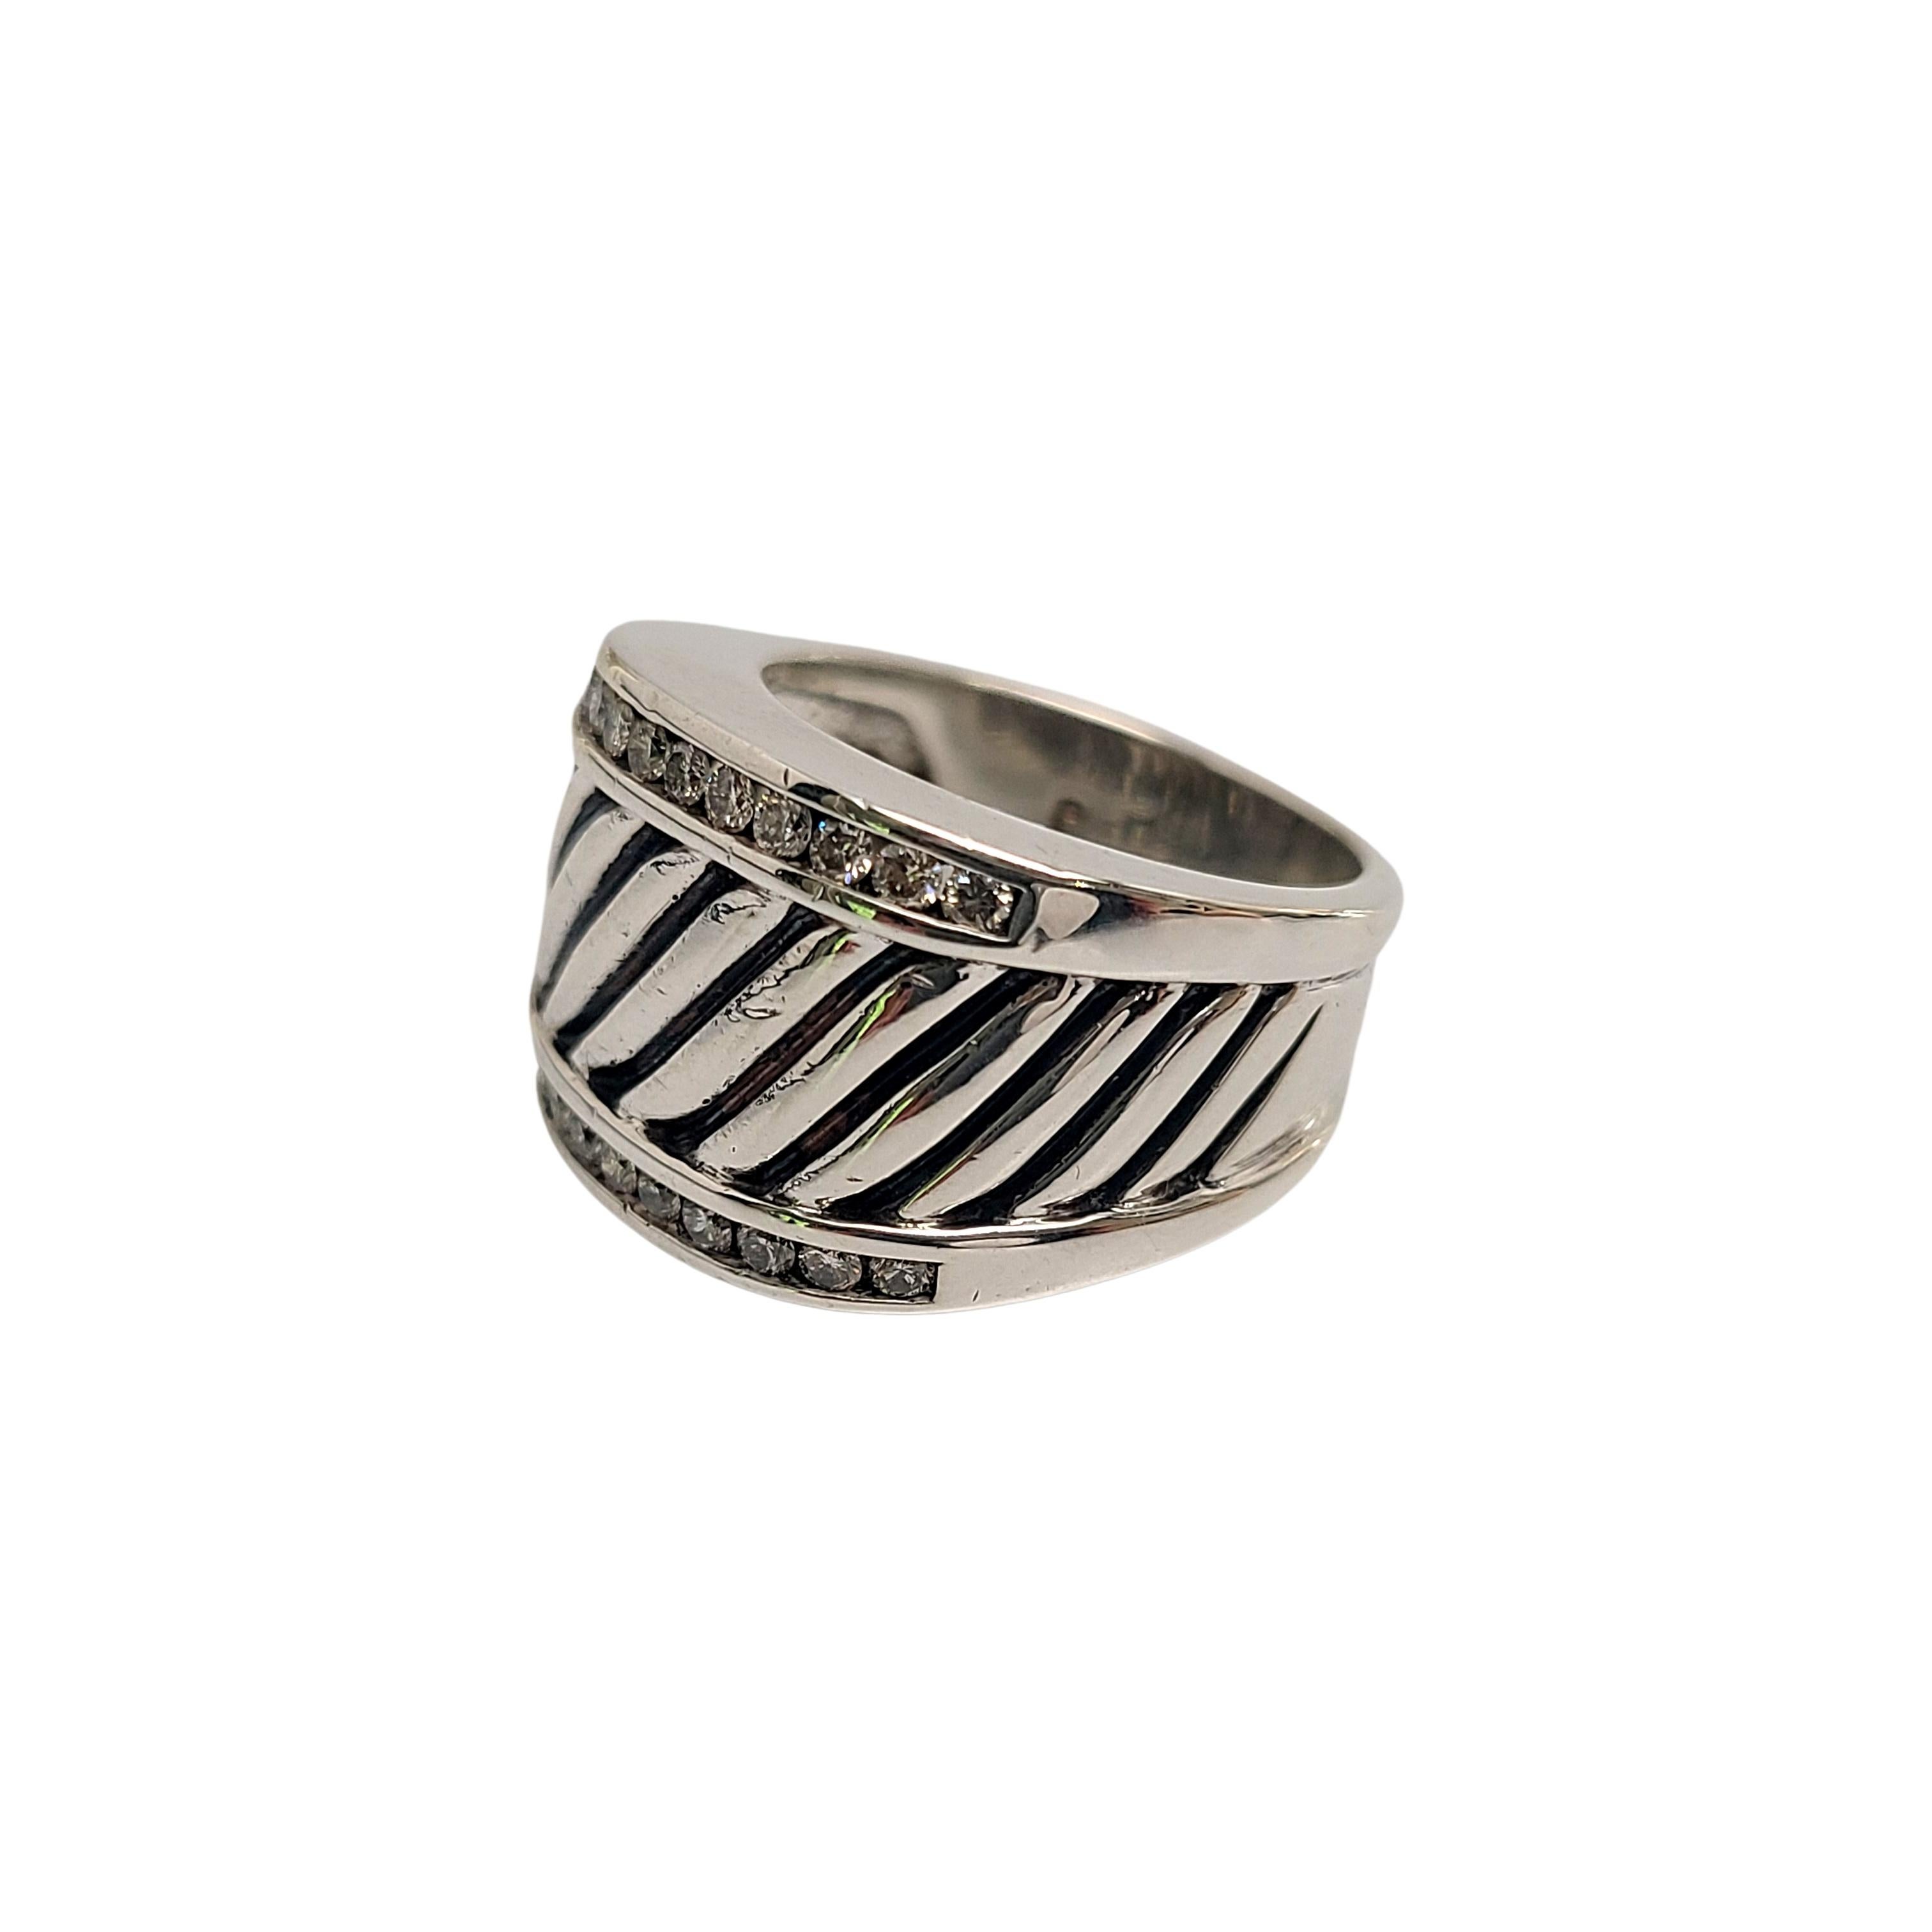 Sterling silver and diamond cigar cable ring by David Yurman.

Size 6 3/4

Features a cable design with 12 small round diamonds bezel set at the top and the bottom of the front of the ring. 24 diamonds total.

Ring measures approx 14.5mm high at